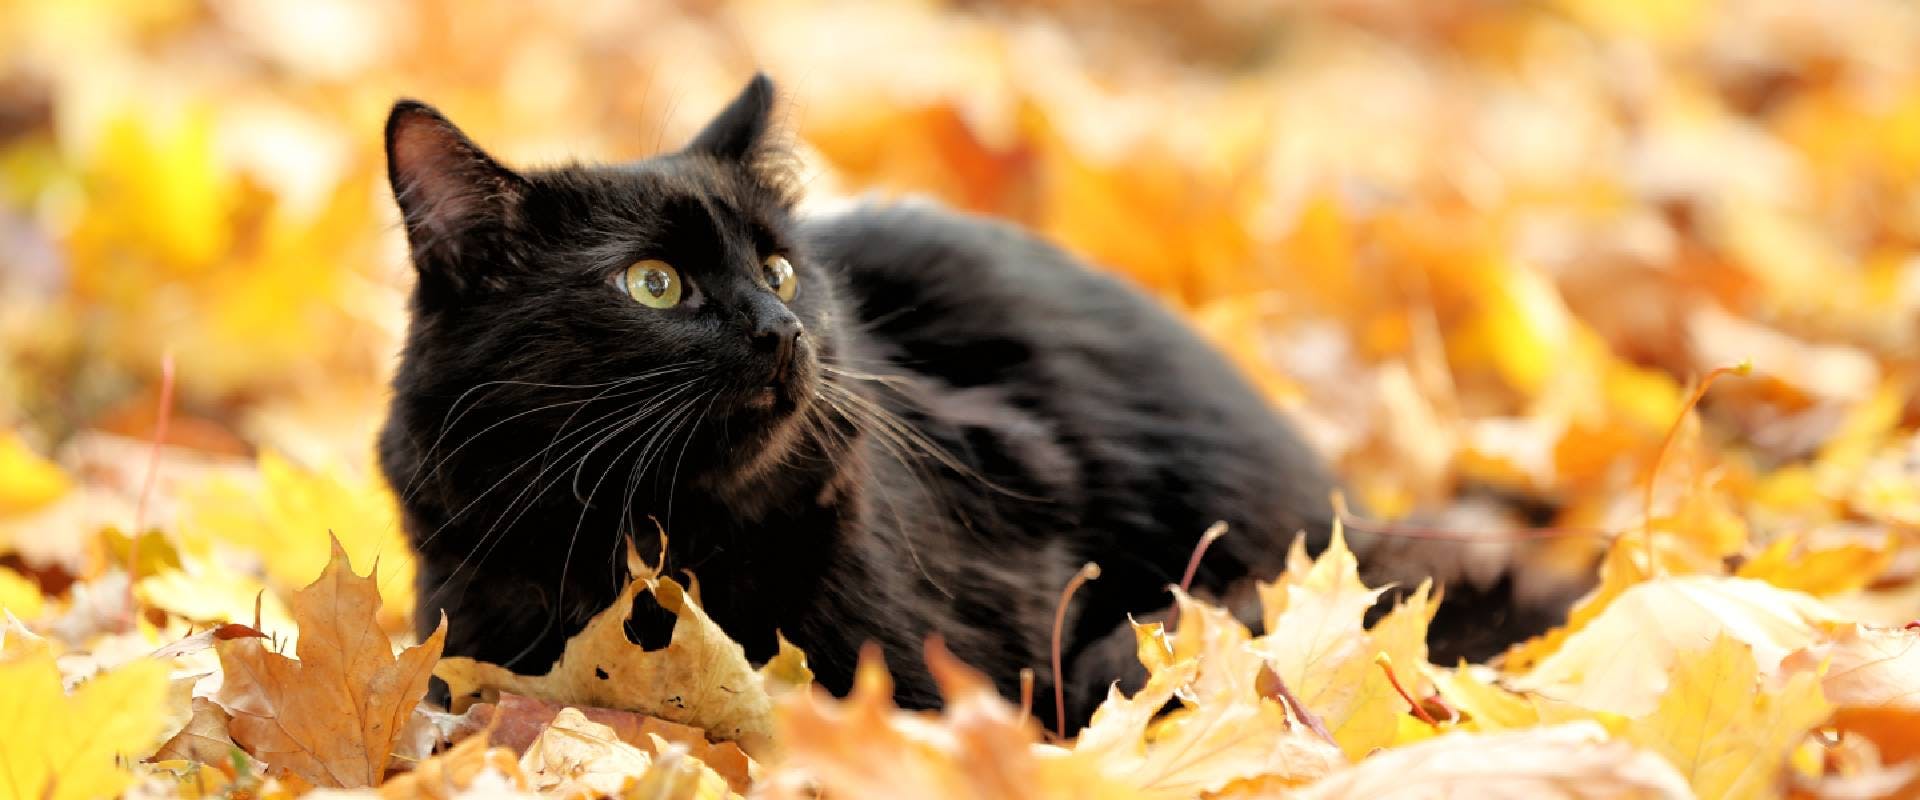 Black cat laying in autumn leaves